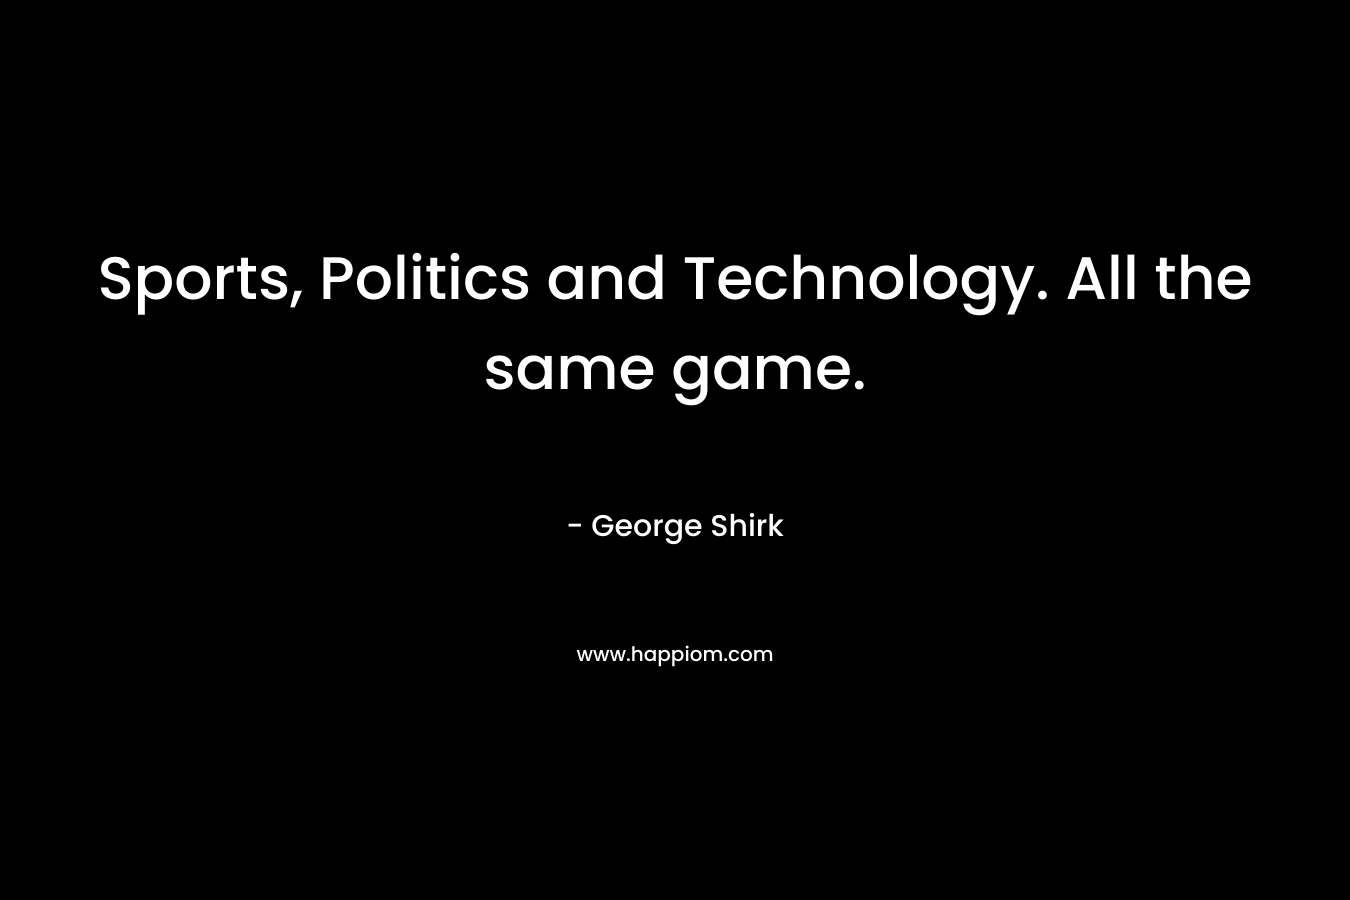 Sports, Politics and Technology. All the same game.